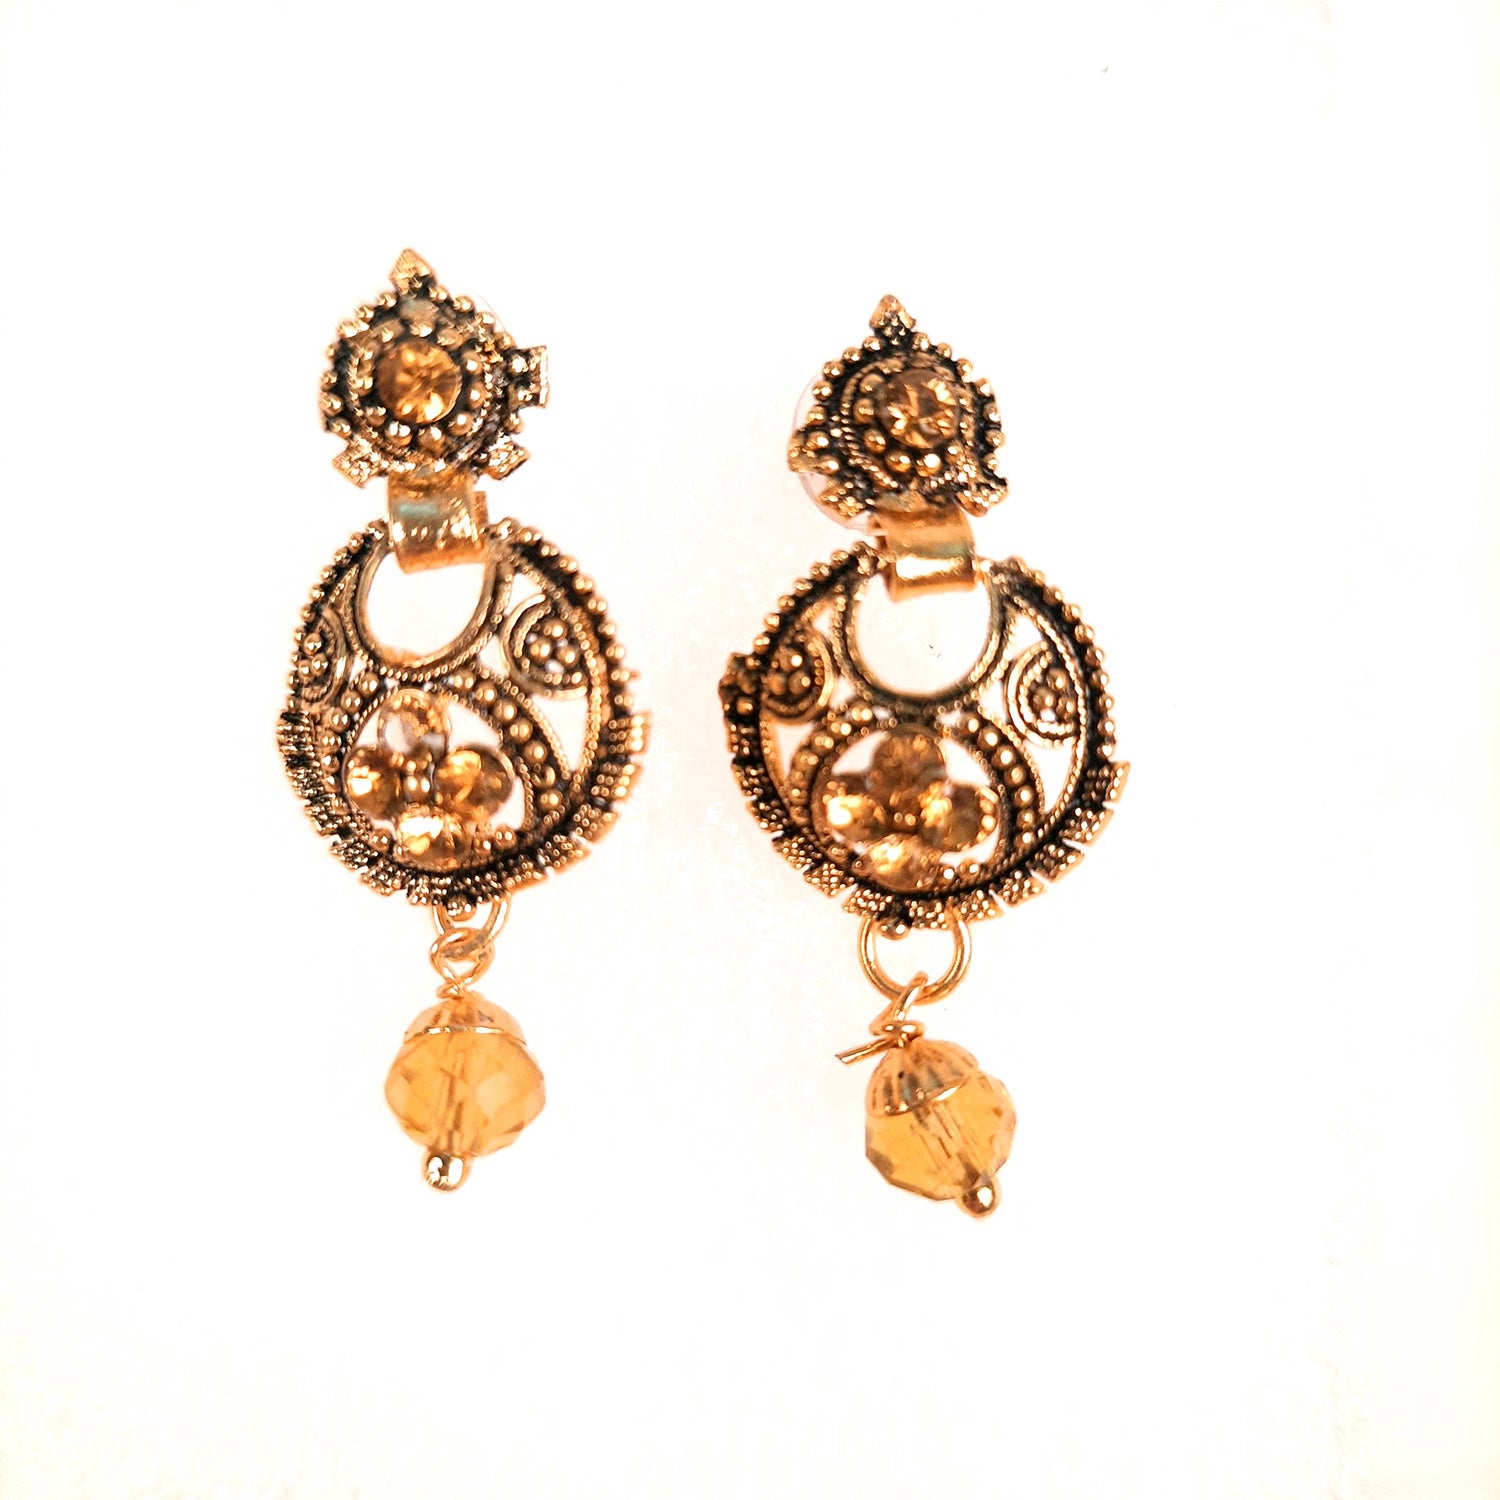 Earrings Jhumka / Danglers - for Girls and Women | Latest Stylish Fashion Jewellery |  Gifts for Her, Friendship Day, Valentine's Day Gift - apkamart